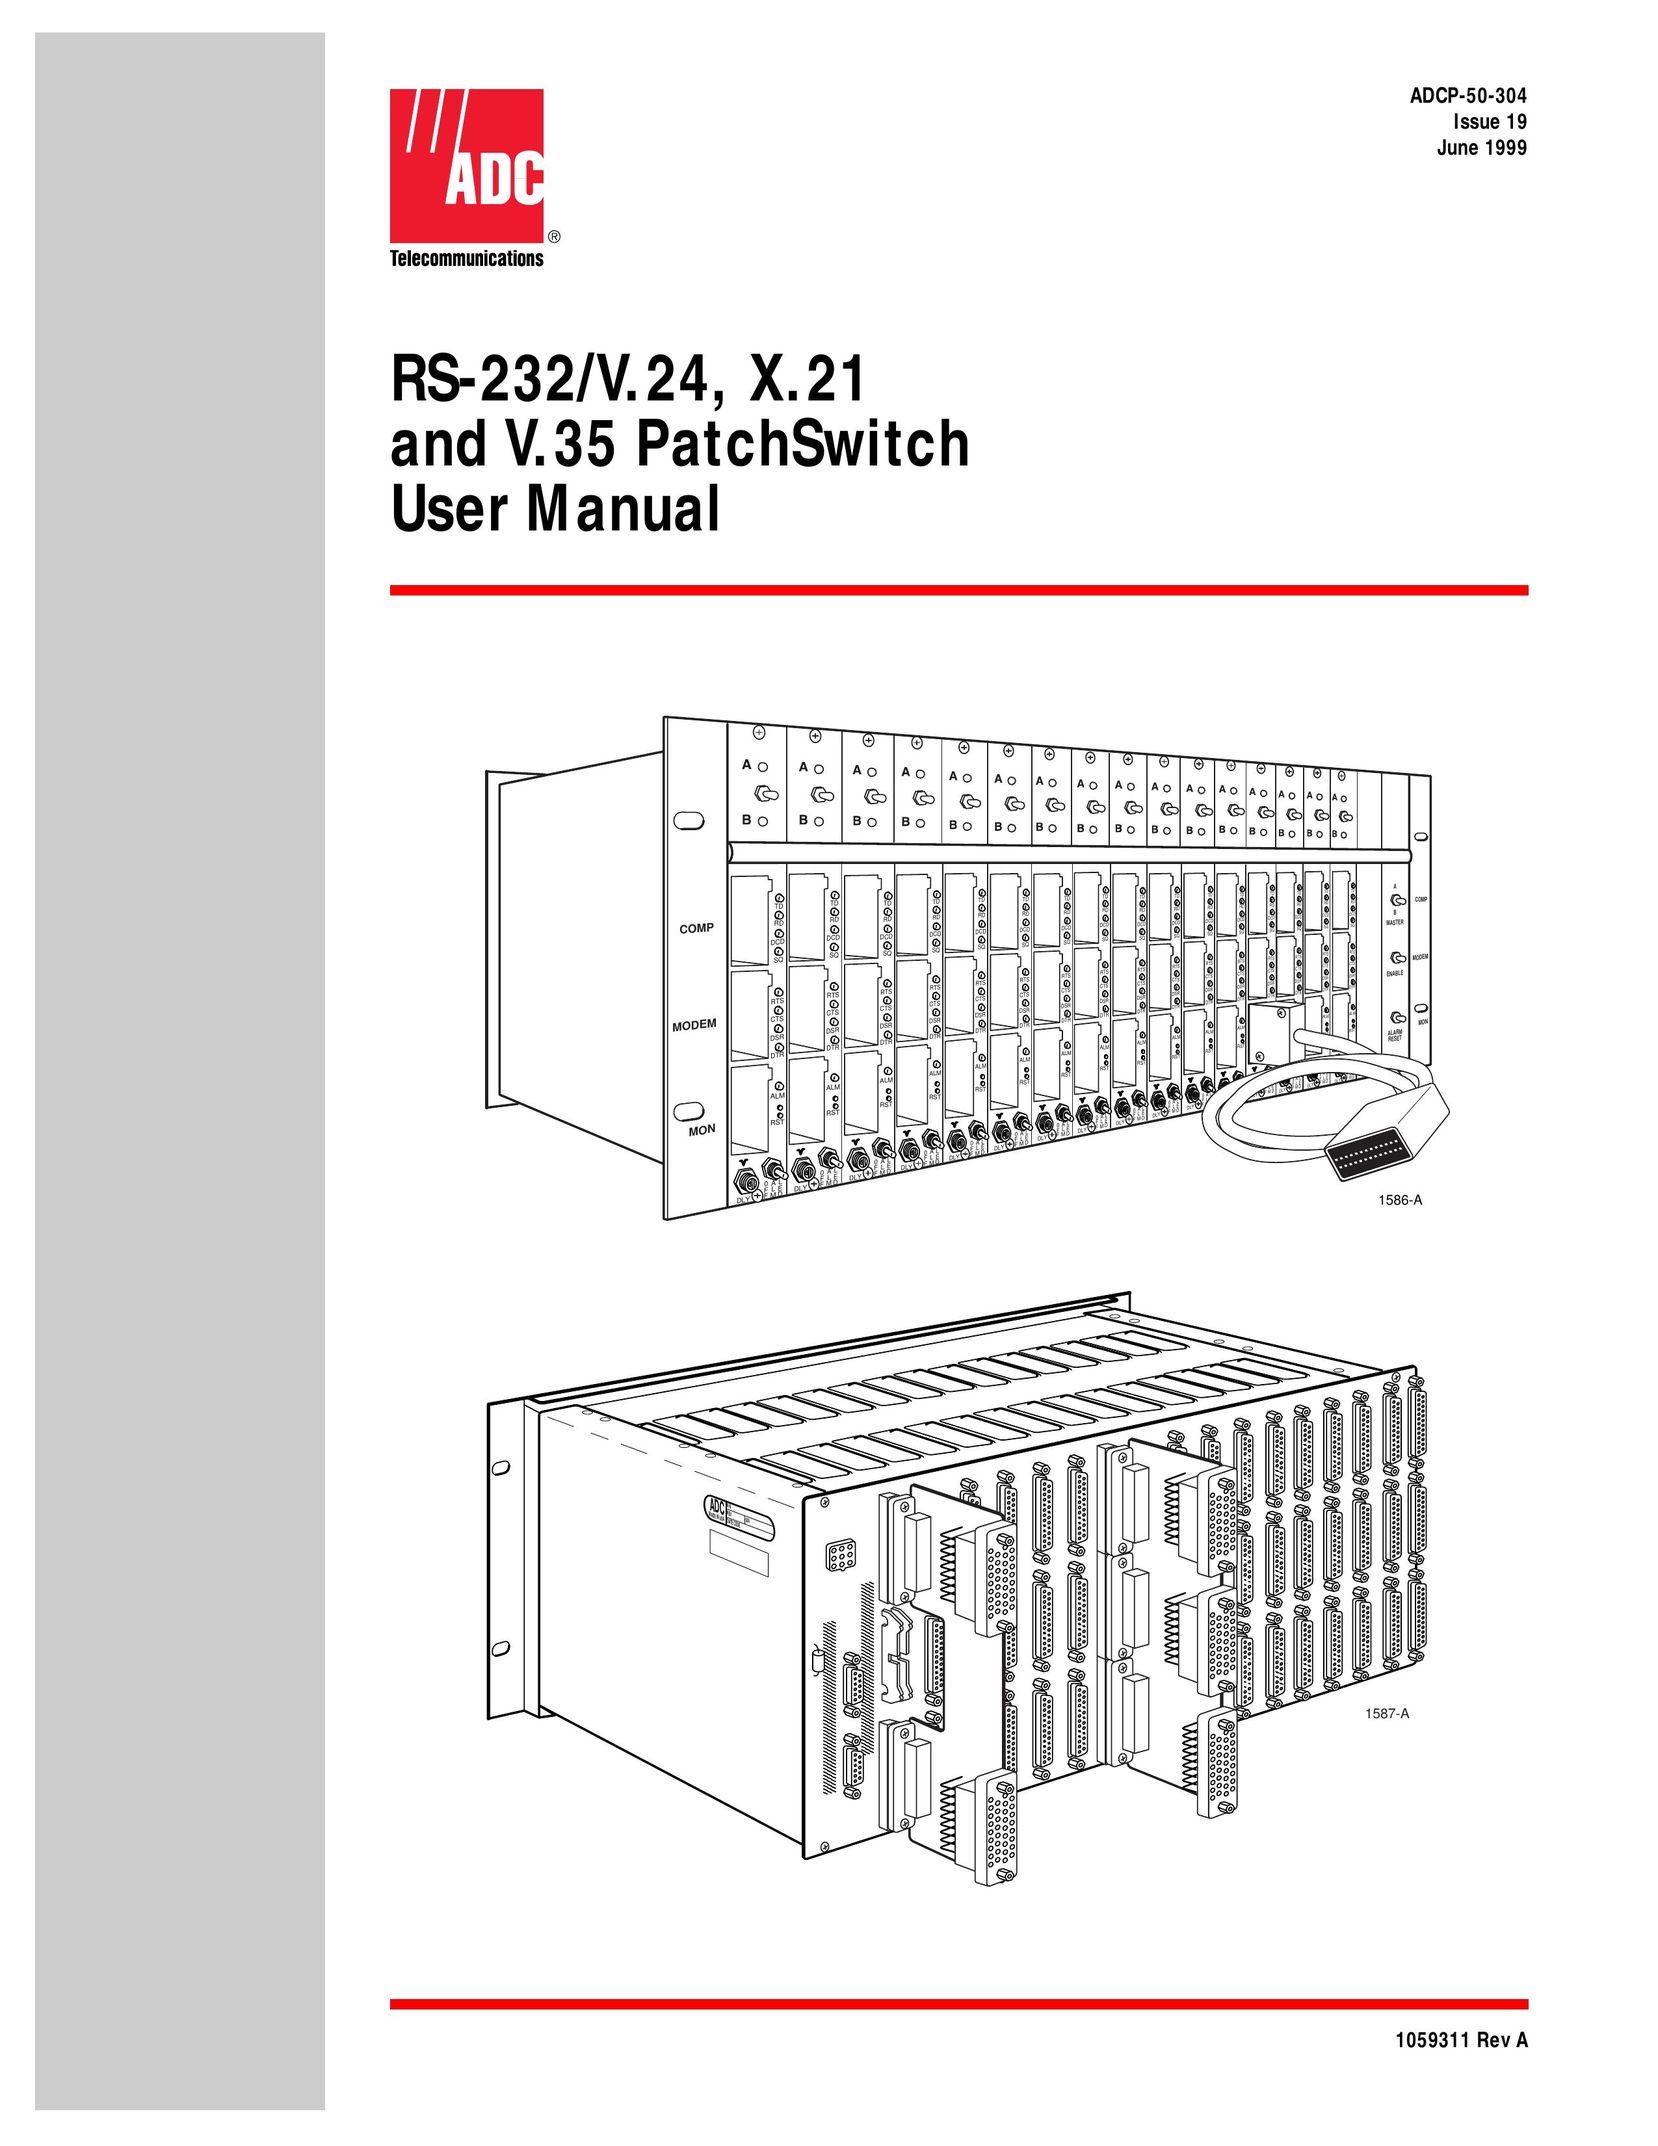 ADC RS-232/V24 Switch User Manual